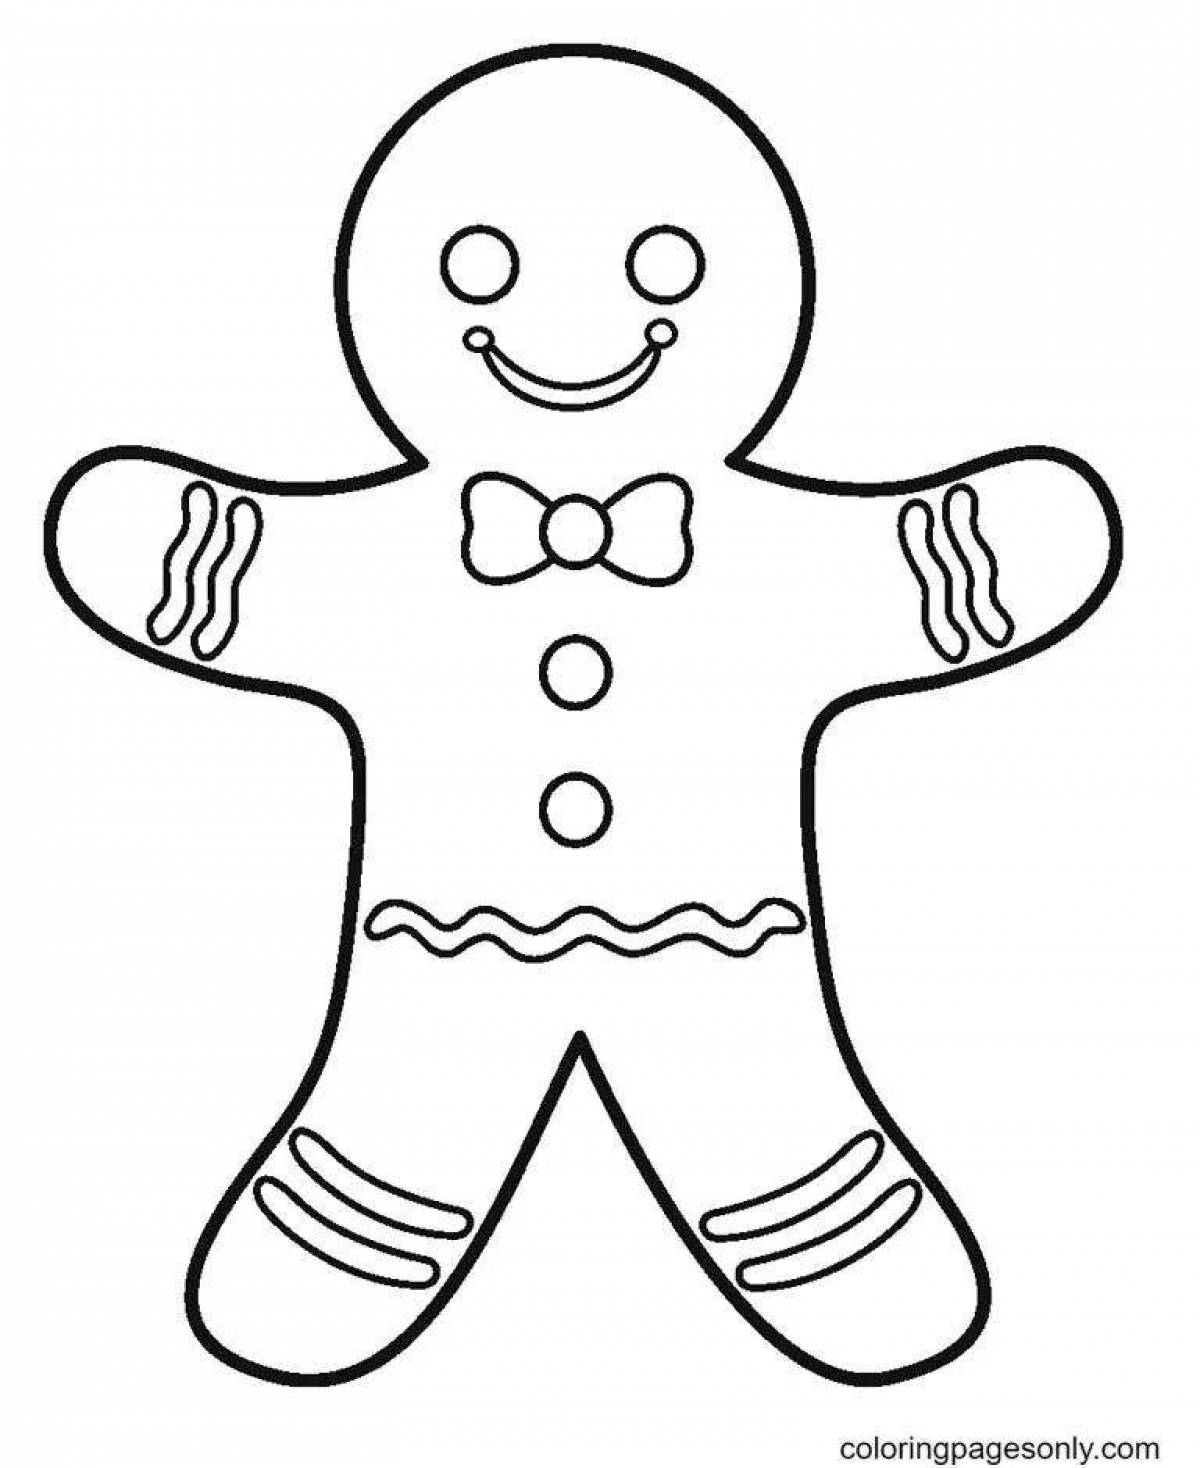 Cute gingerbread coloring page